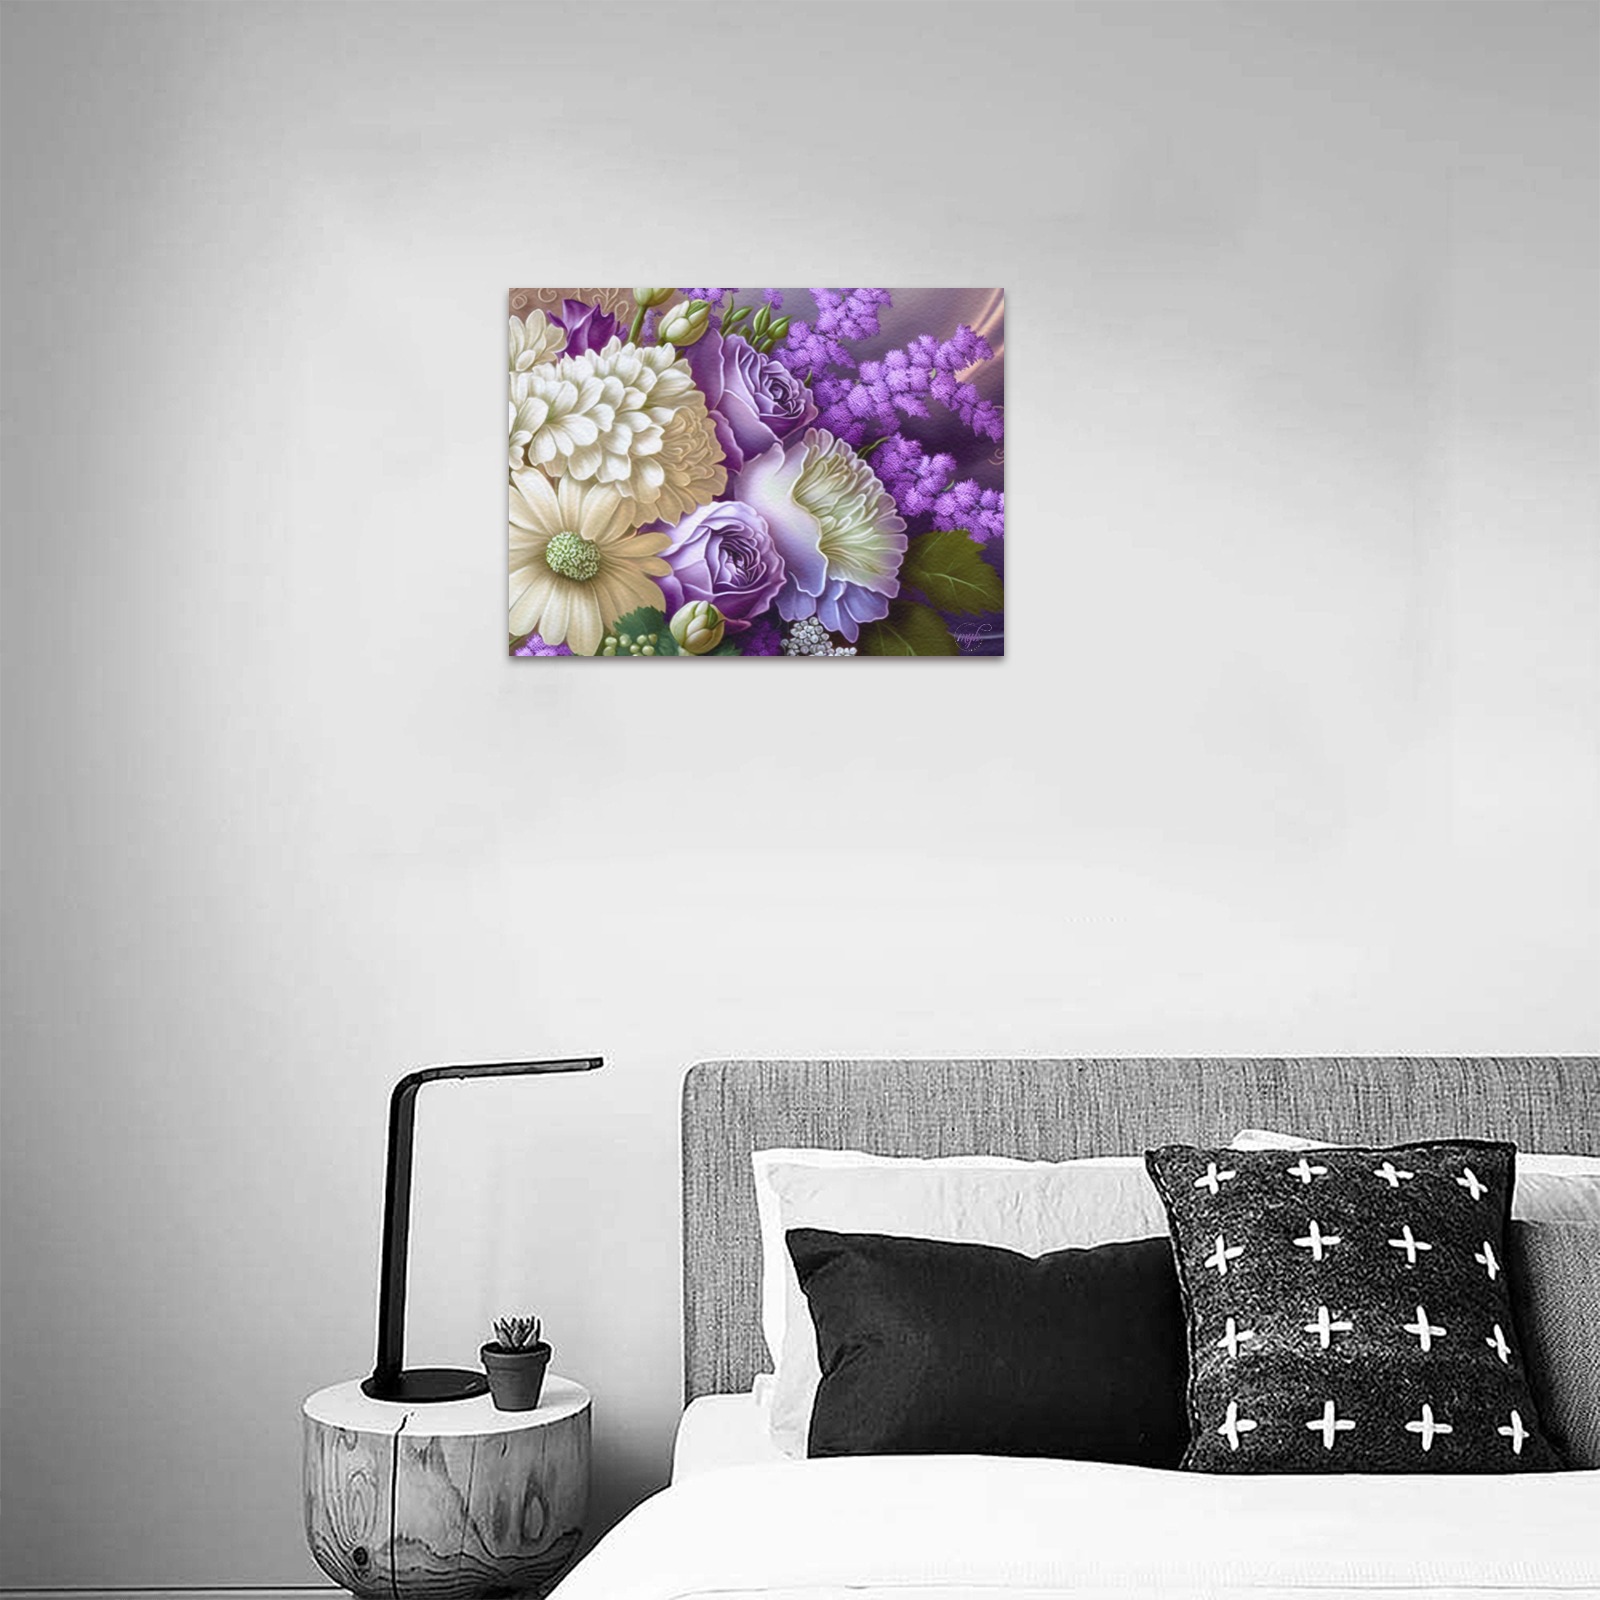 April Showers bring May Flowers Upgraded Canvas Print 16"x12"